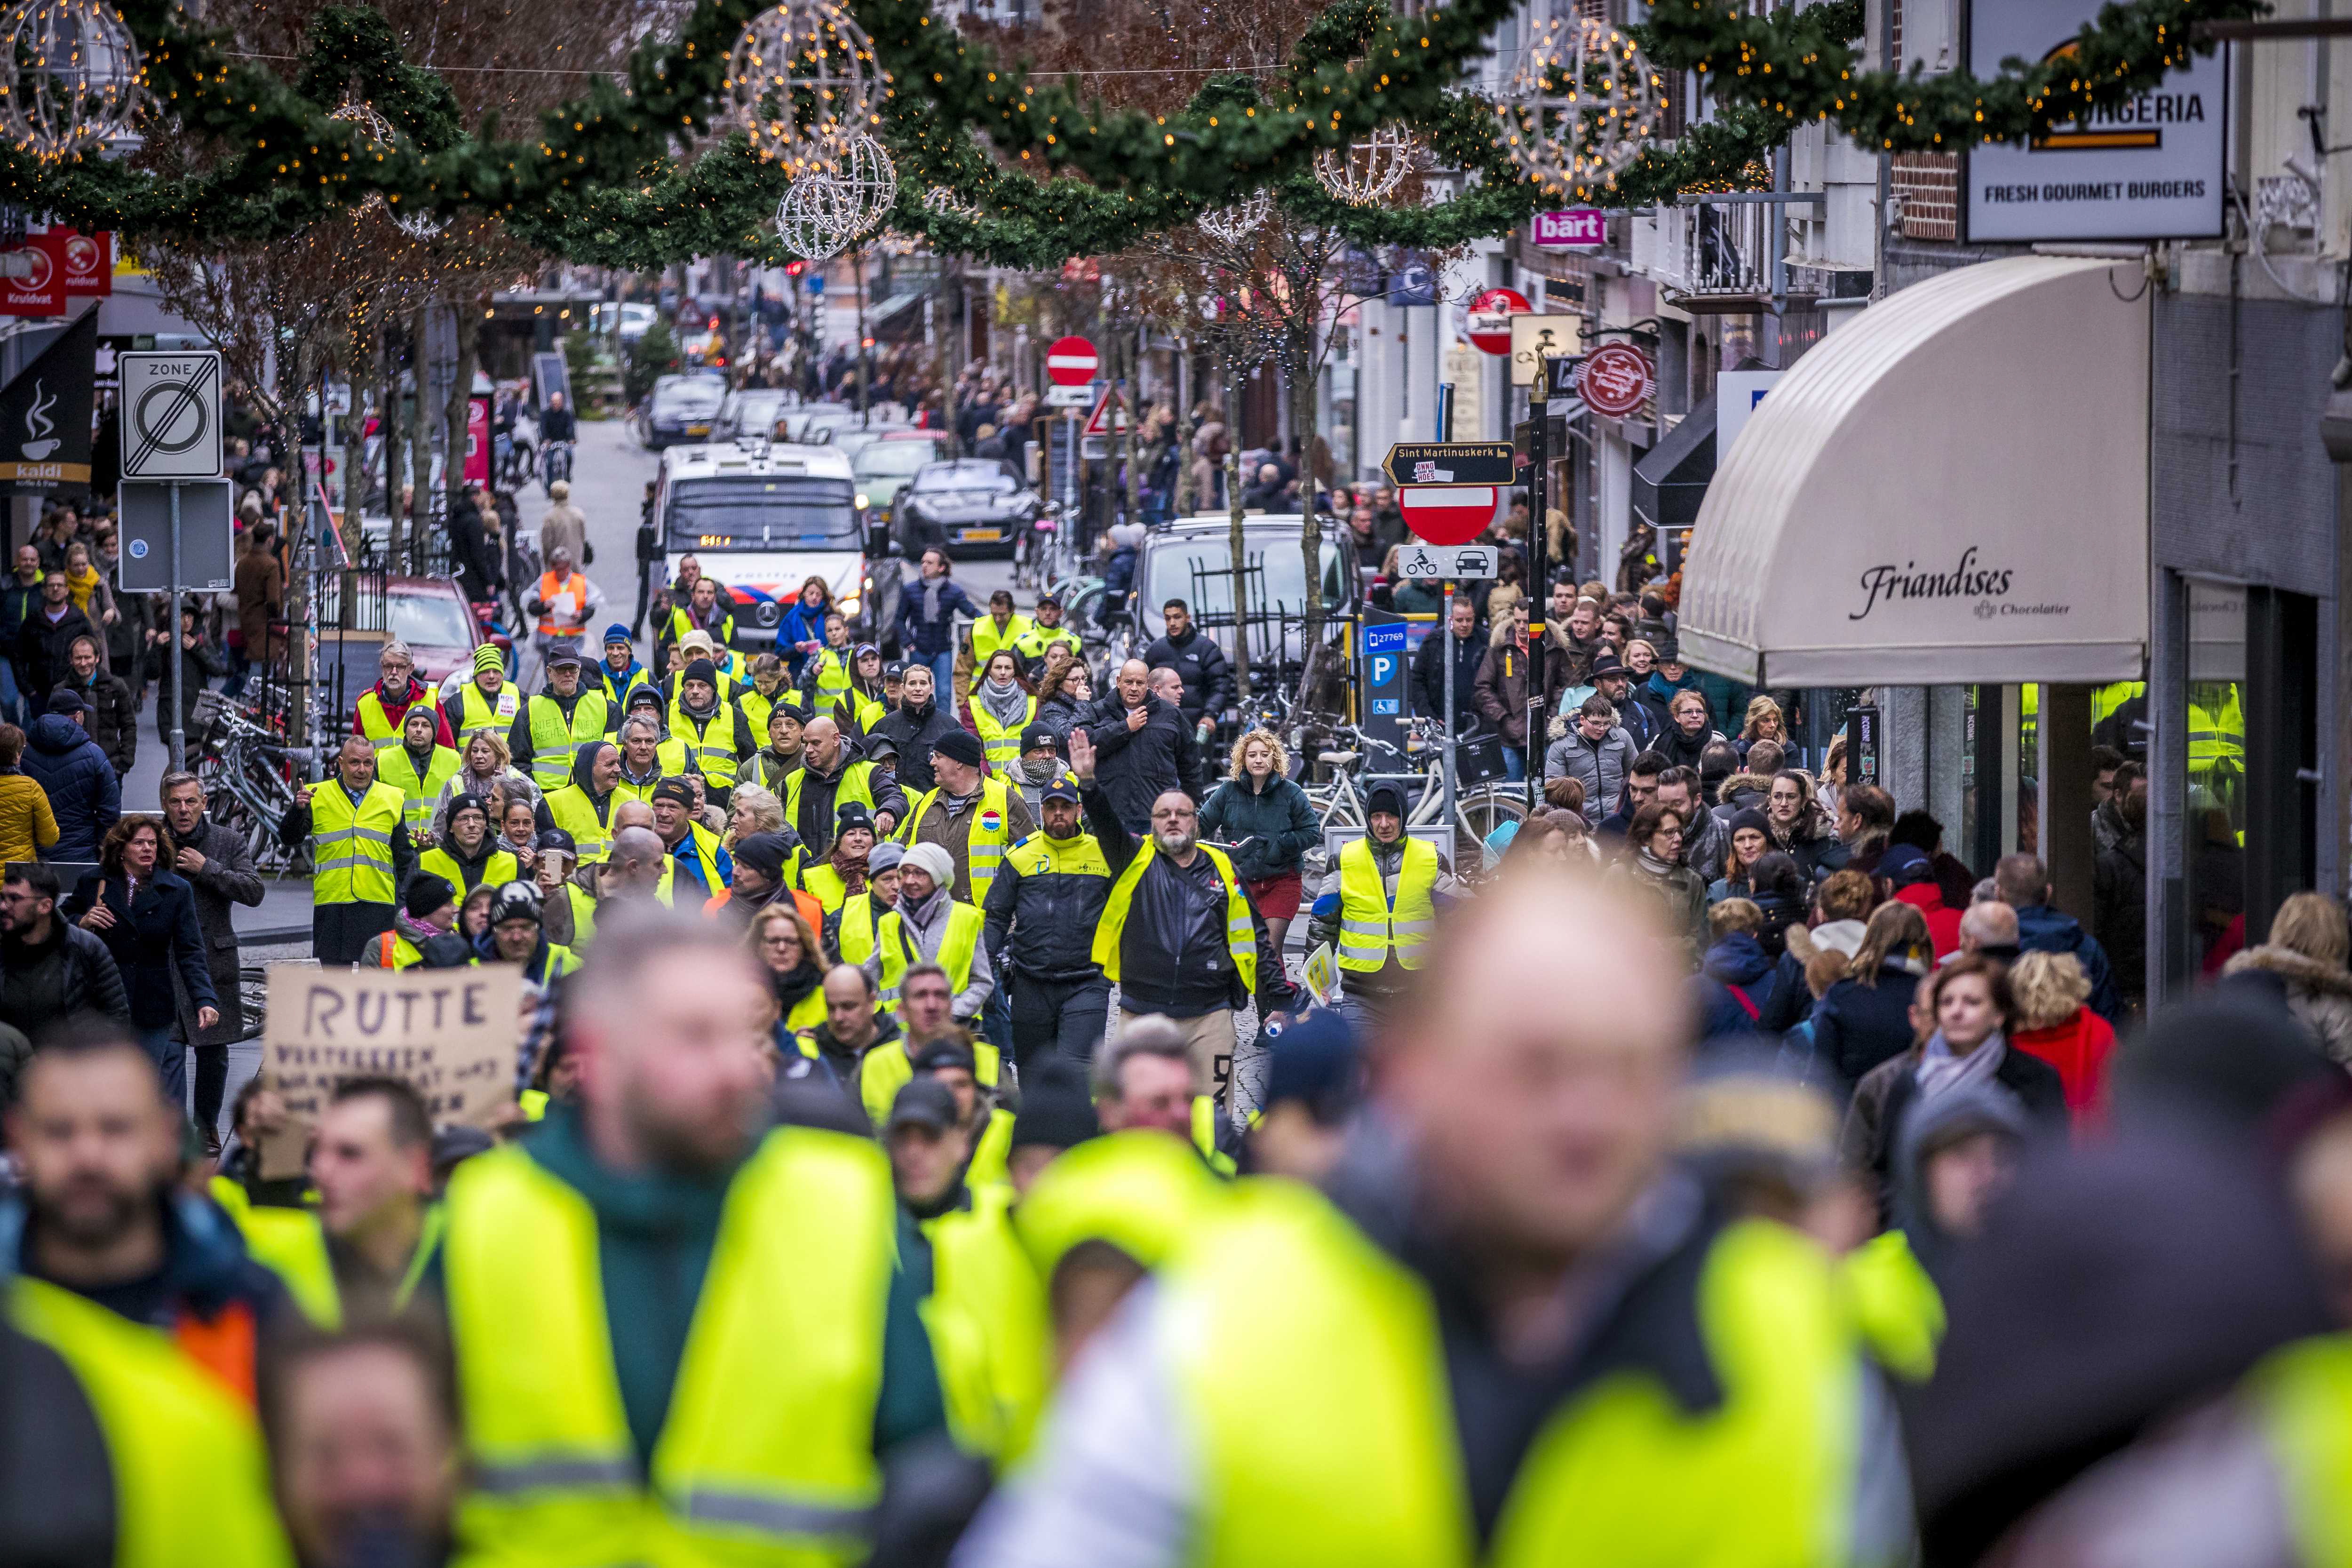 epa07217254 Protestors wearing yellow vests demonstrate in Maastricht in the south of The Netherlands, 08 December 2018. The so-called gilets jaunes (yellow vests) protest movement, which started in France, is protesting over rising fuel prices and taxes.  EPA/MARCEL VAN HOORN